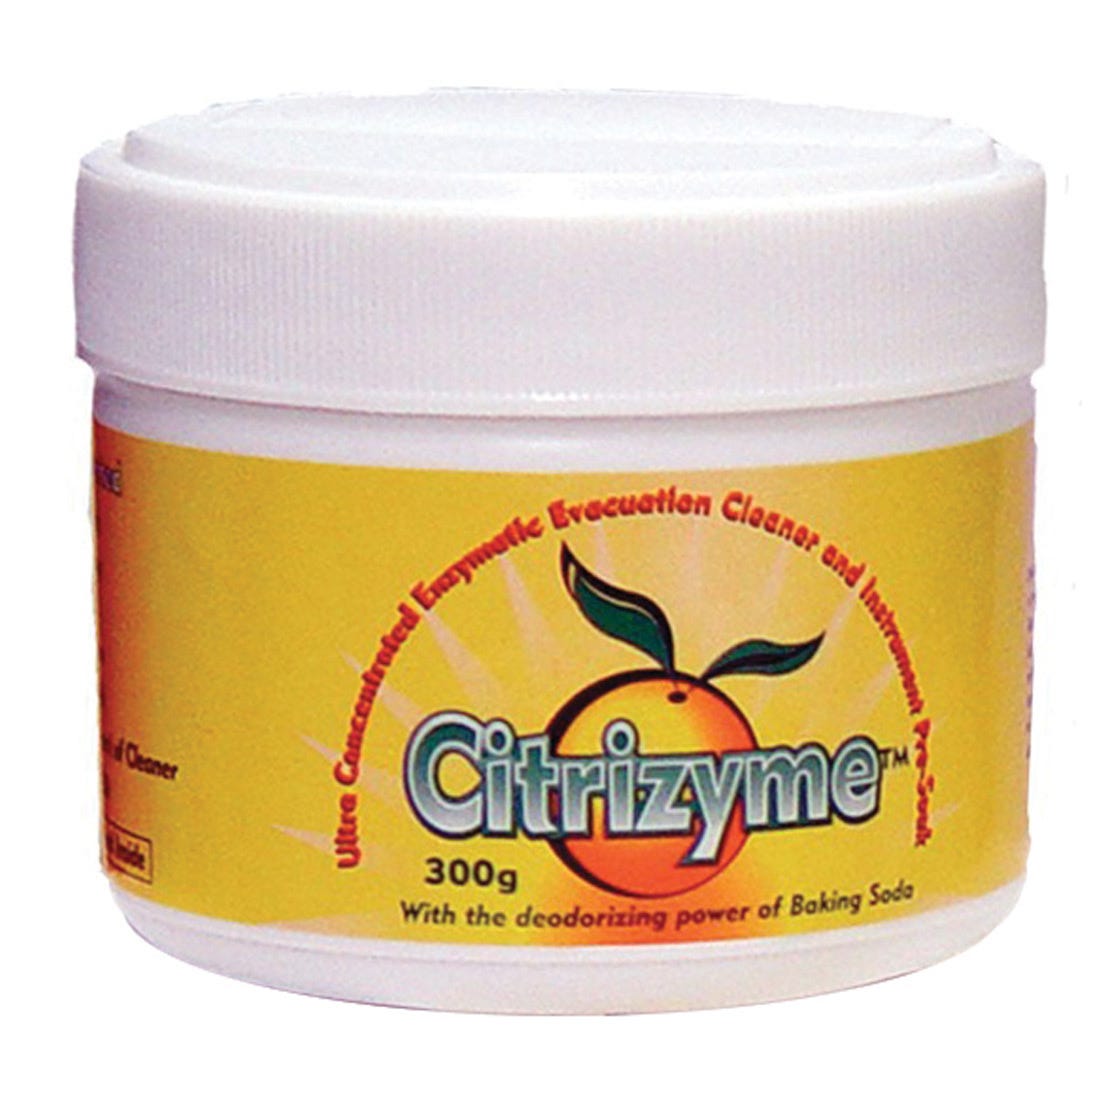 CITRIZYME™ CONCENTRATE EVACUATION CLEANER